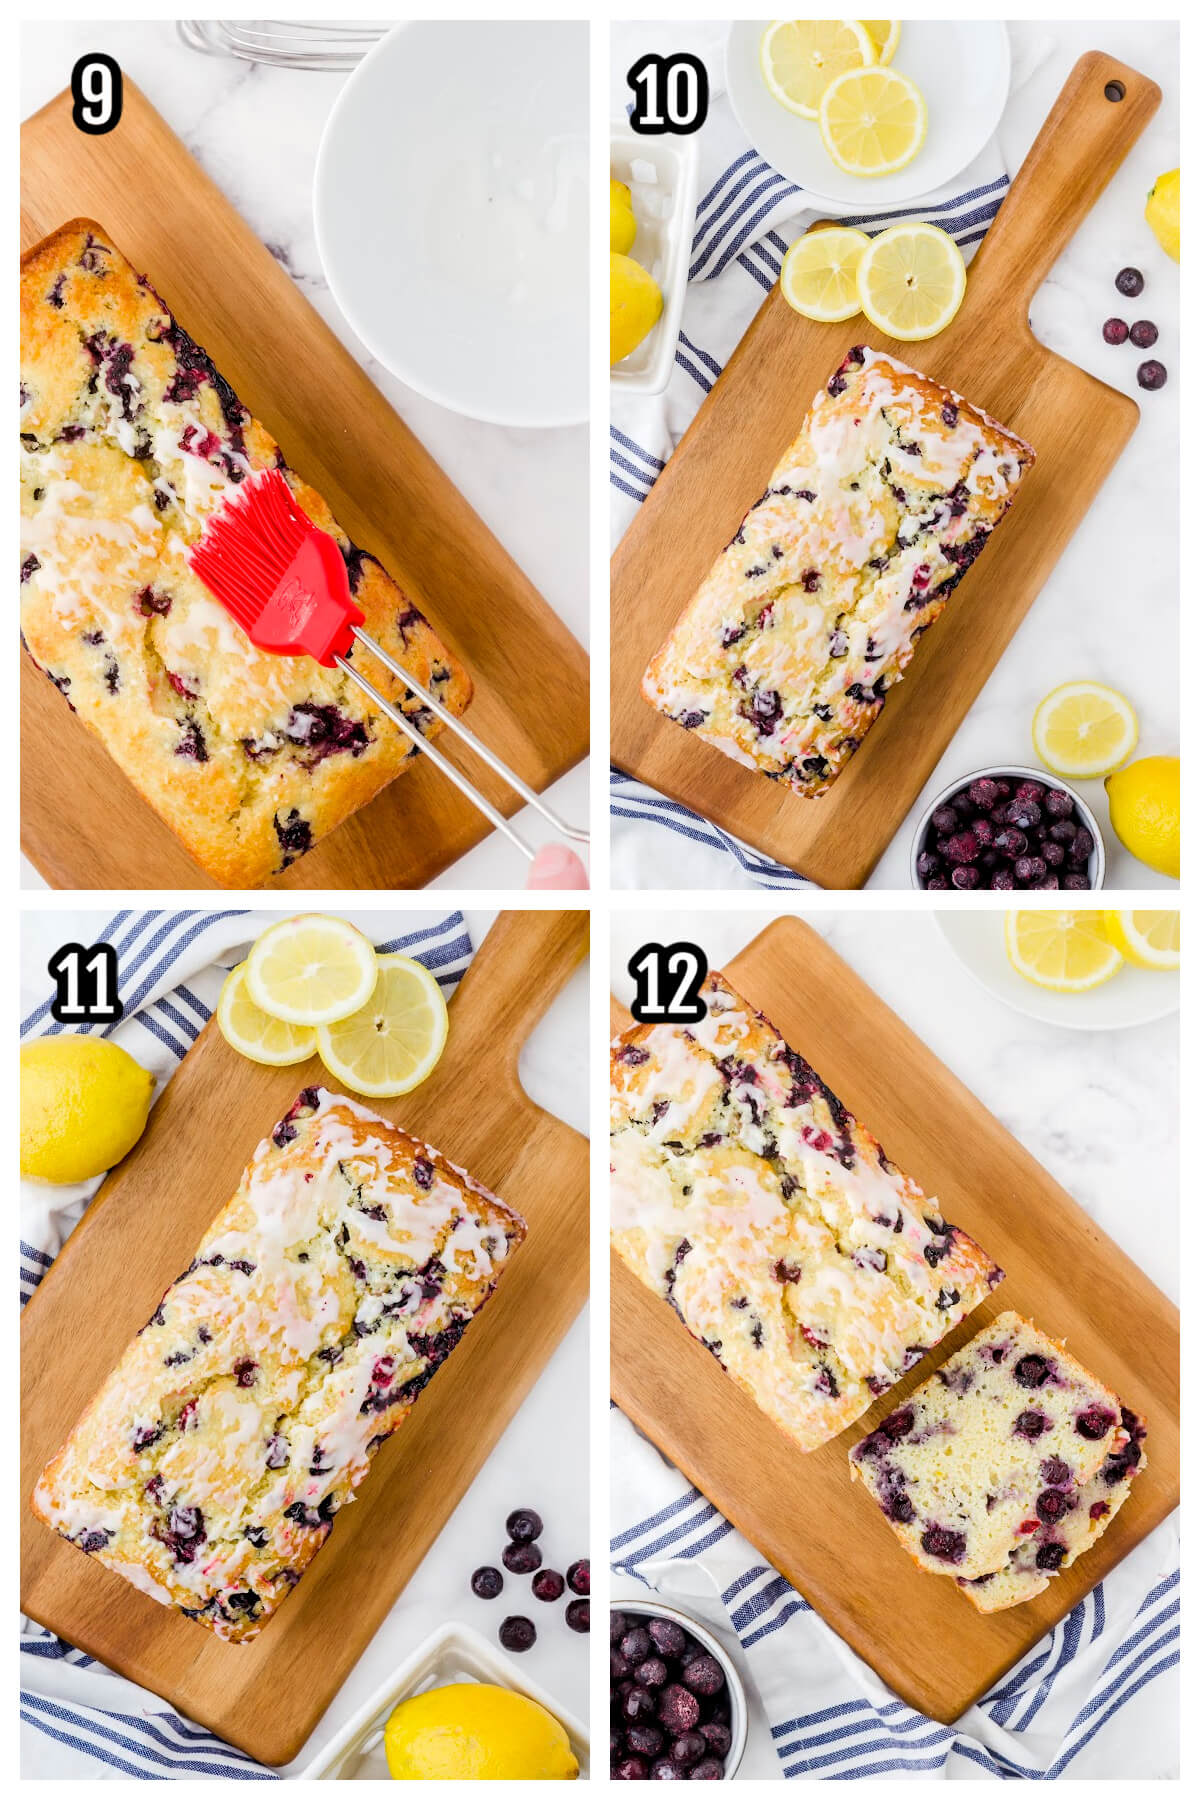 Third and final steps to making the blueberry lemon loaf. 